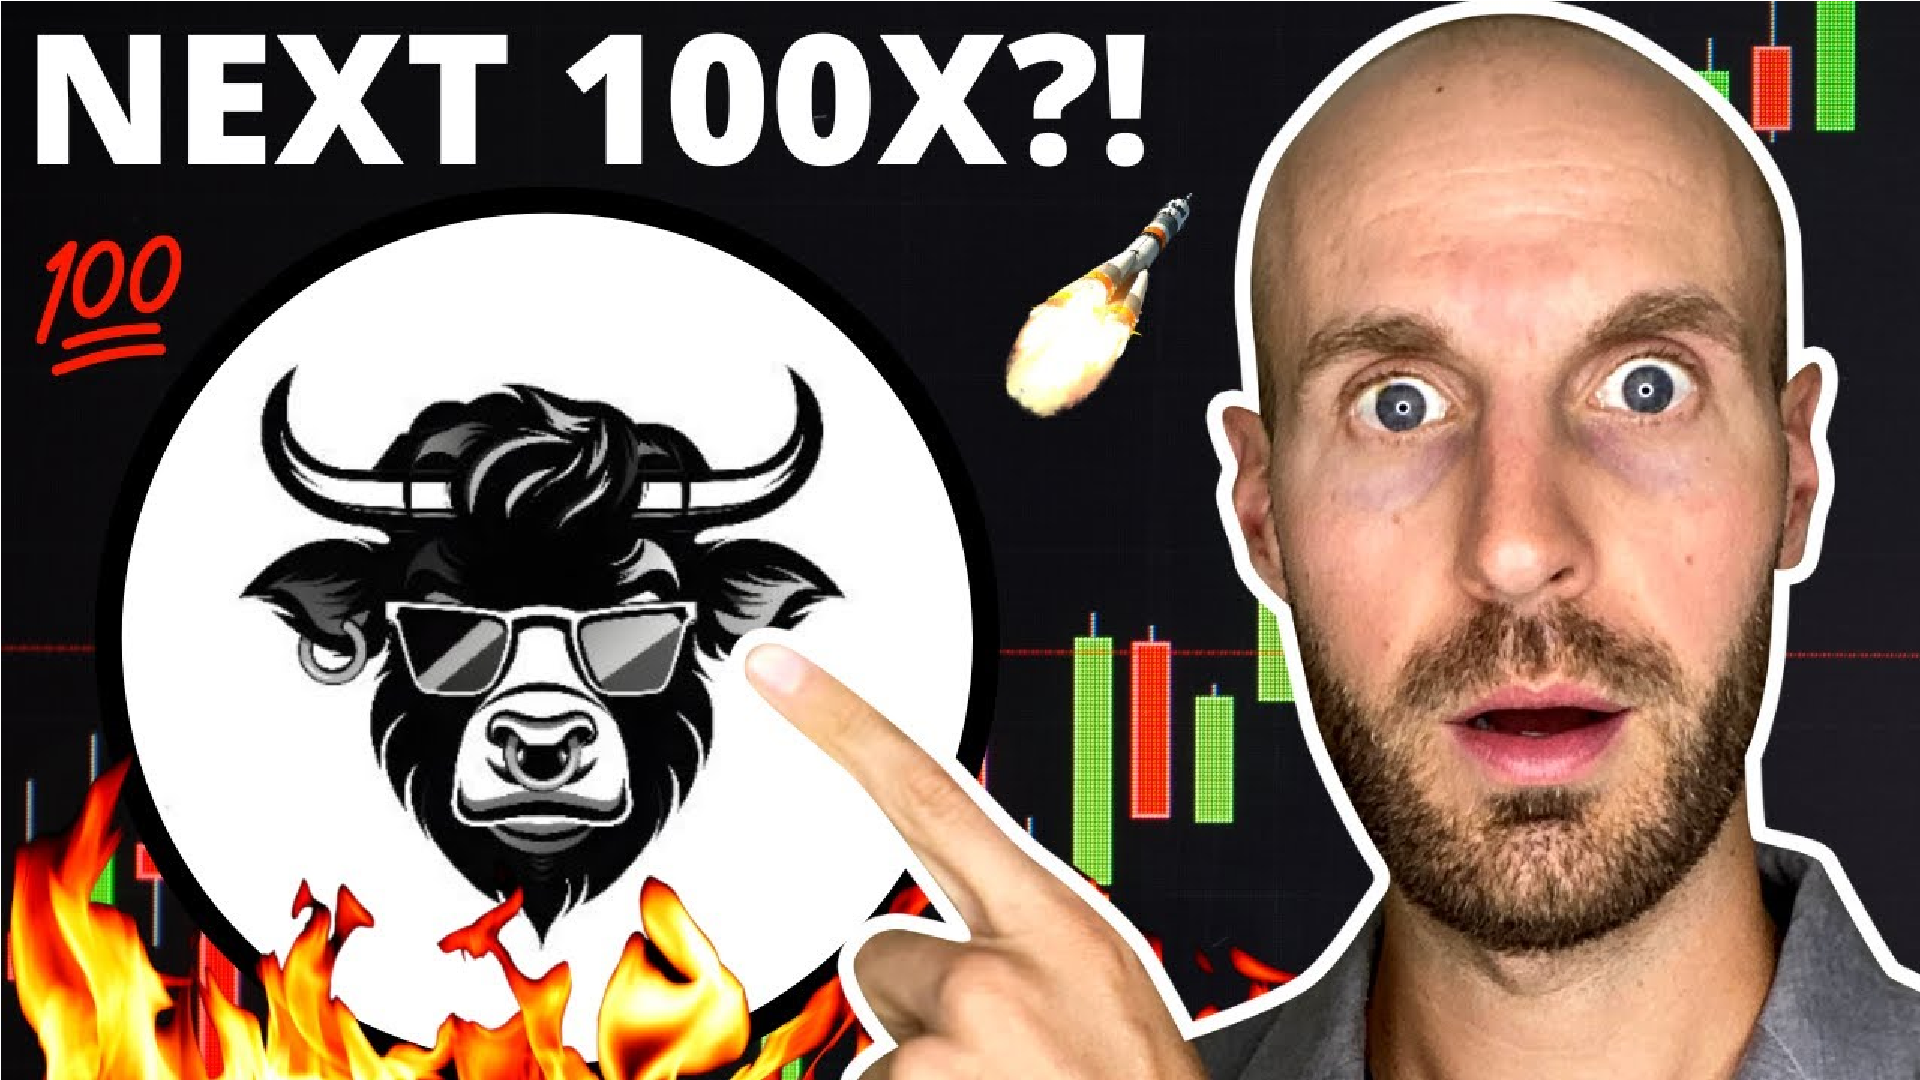 One Of The Most Followed Crypto YouTube Channels Tips The Next 100x Meme Coin